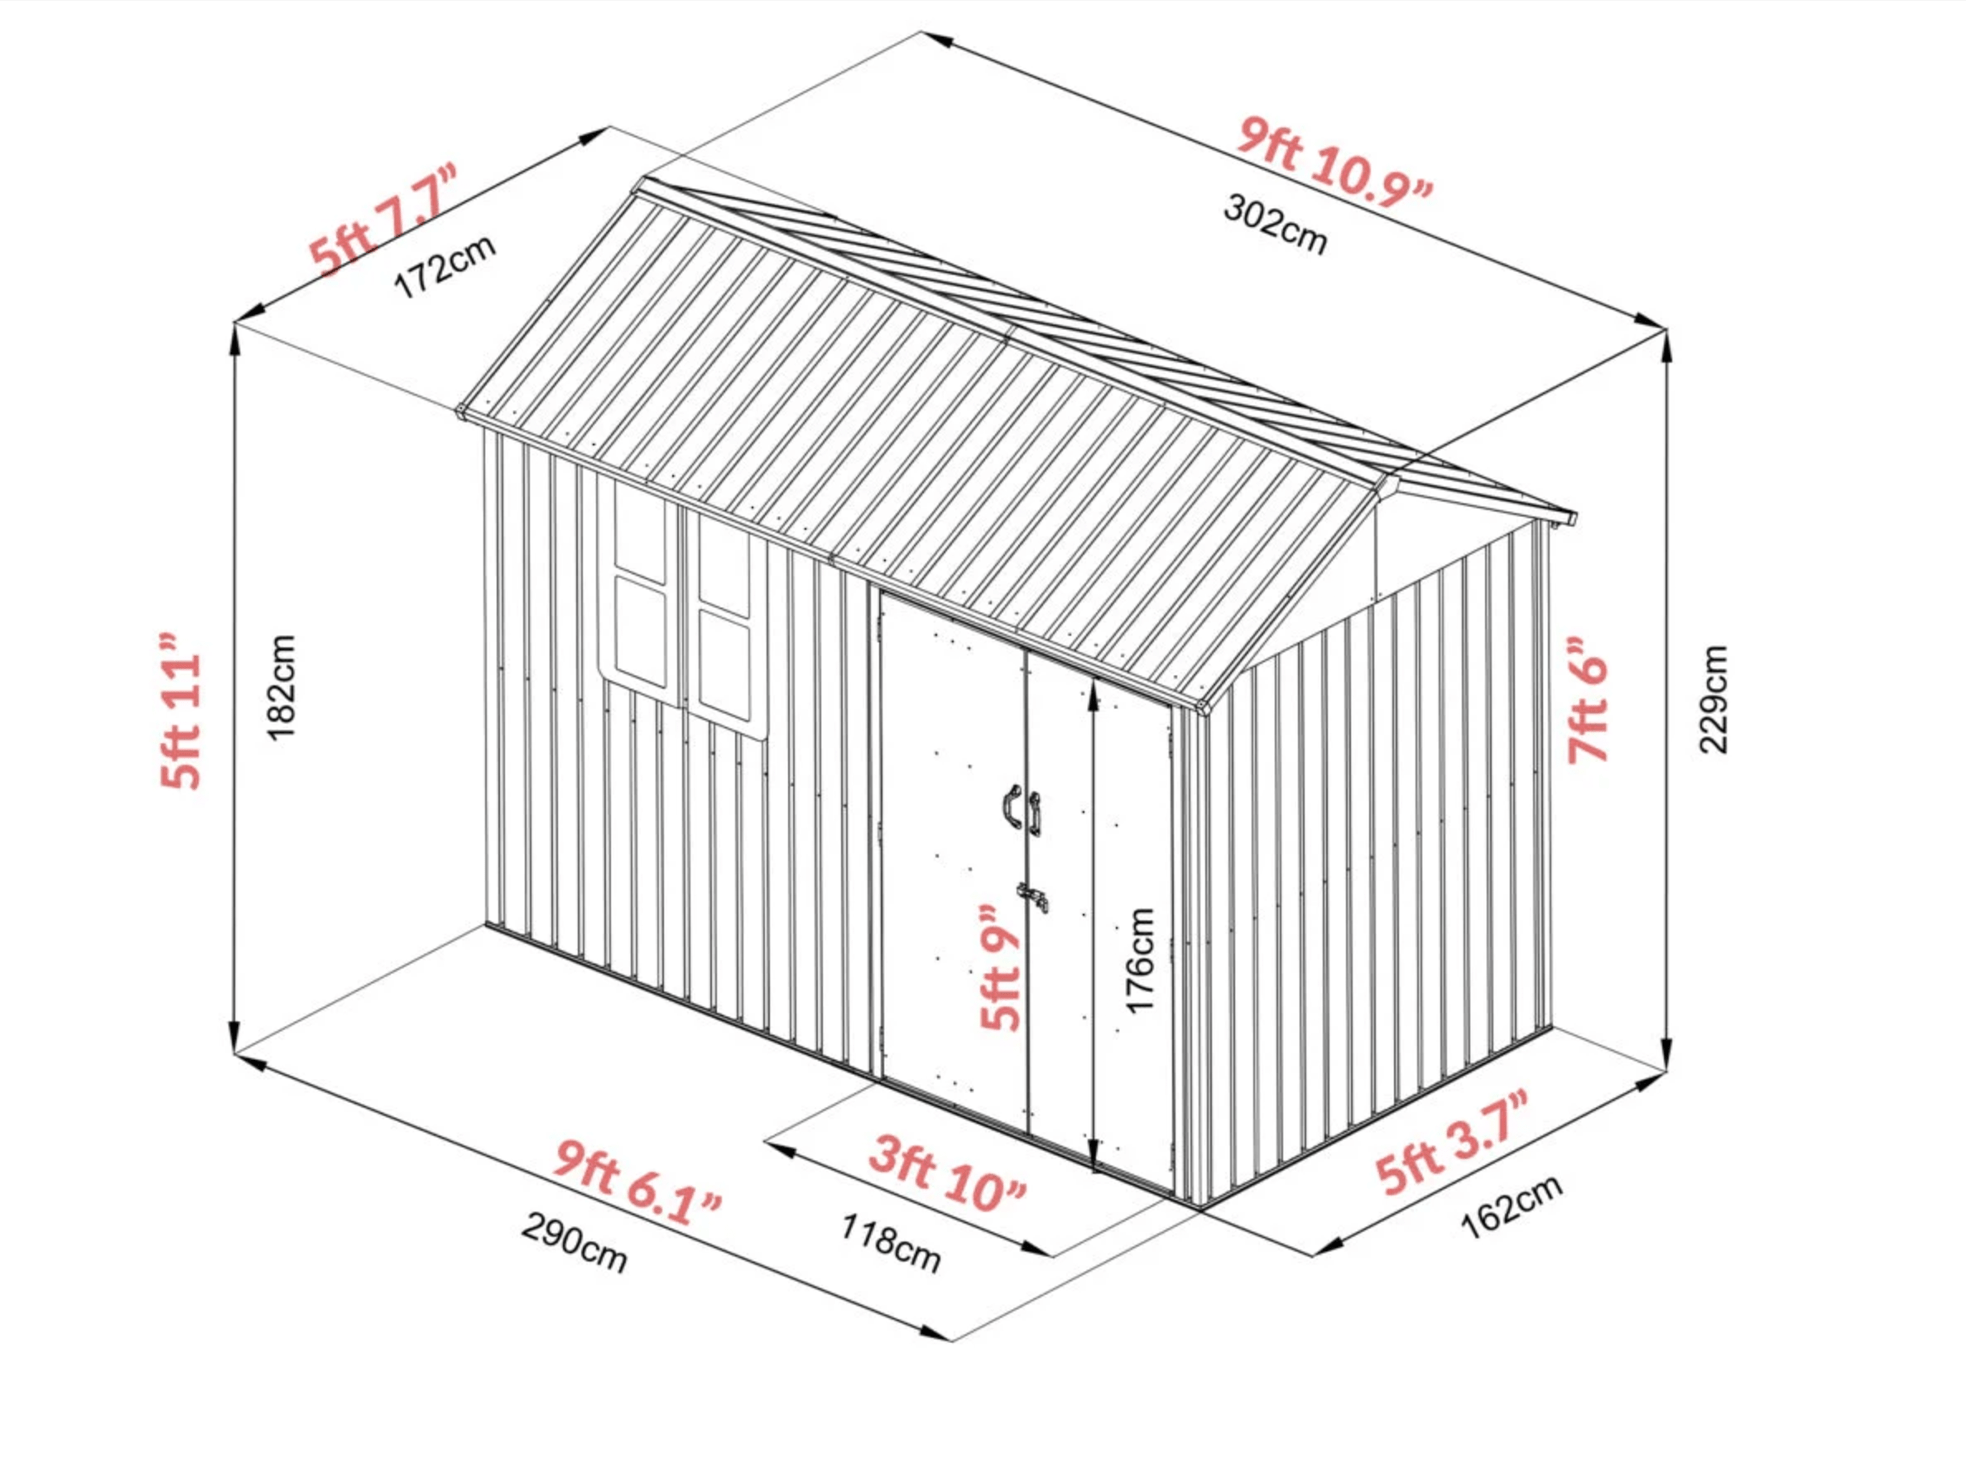 The dimensions of the 10ft x 6ft steel cottage shed